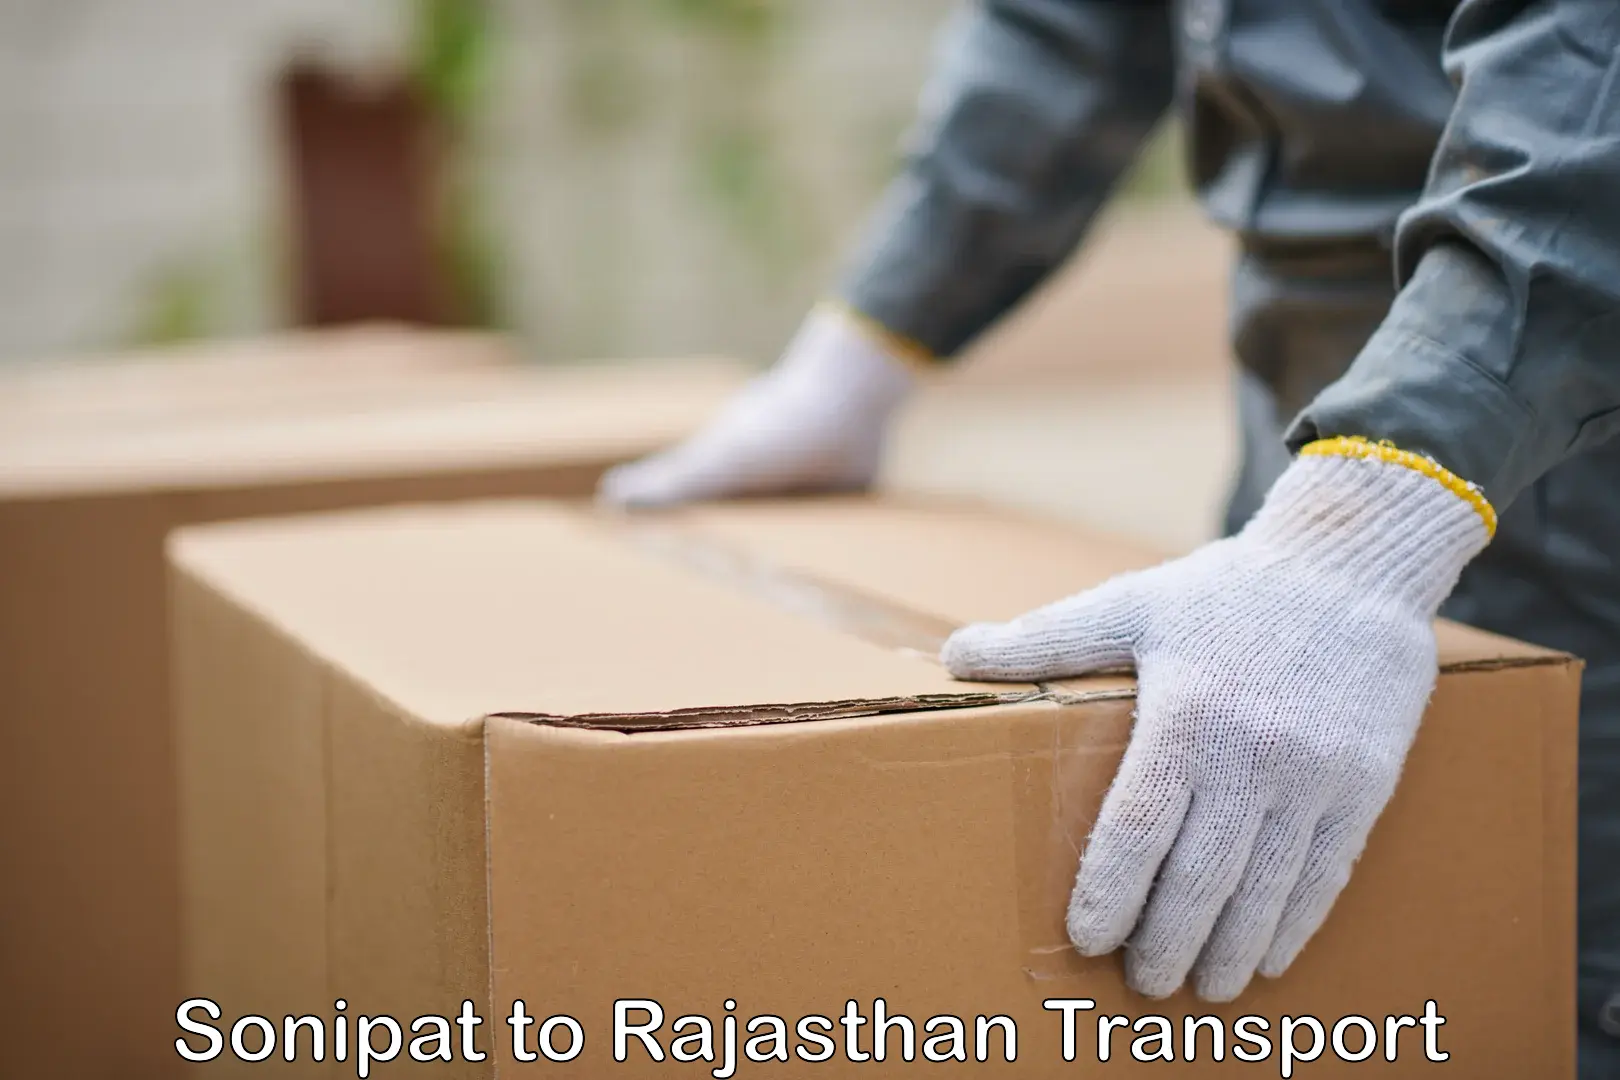 Goods delivery service Sonipat to Laxmangarh